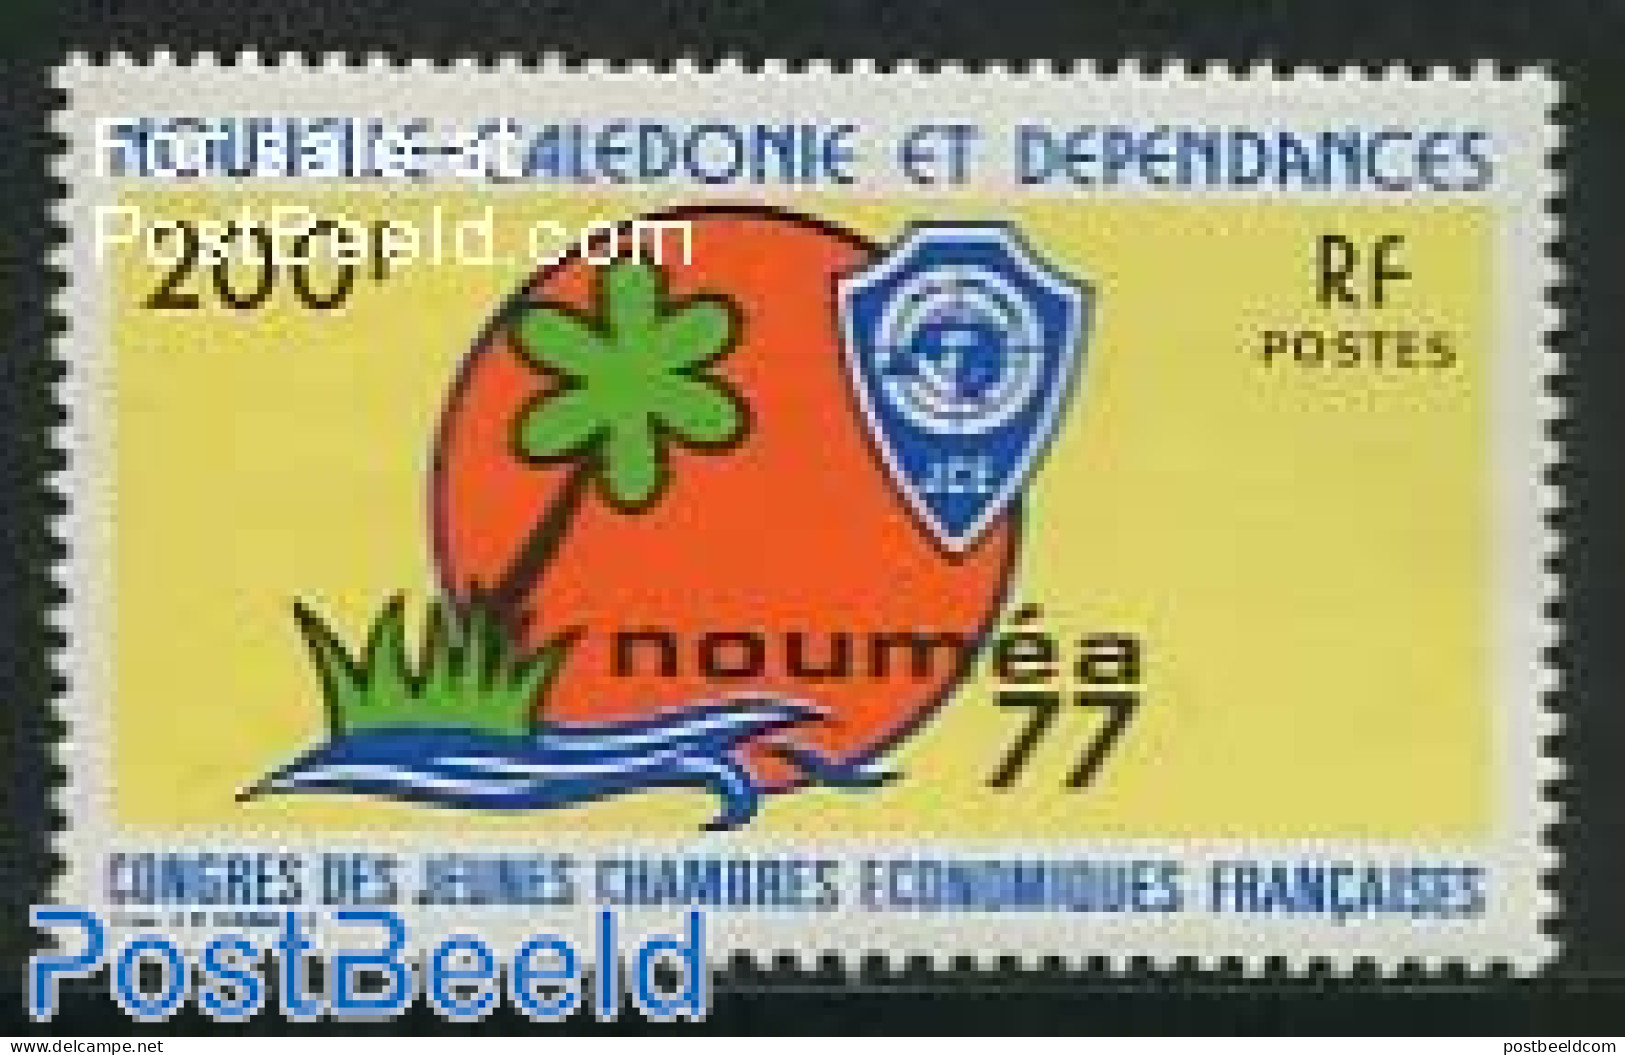 New Caledonia 1977 Junior Chamber Of Commerce 1v, Mint NH, Various - Export & Trade - Unused Stamps